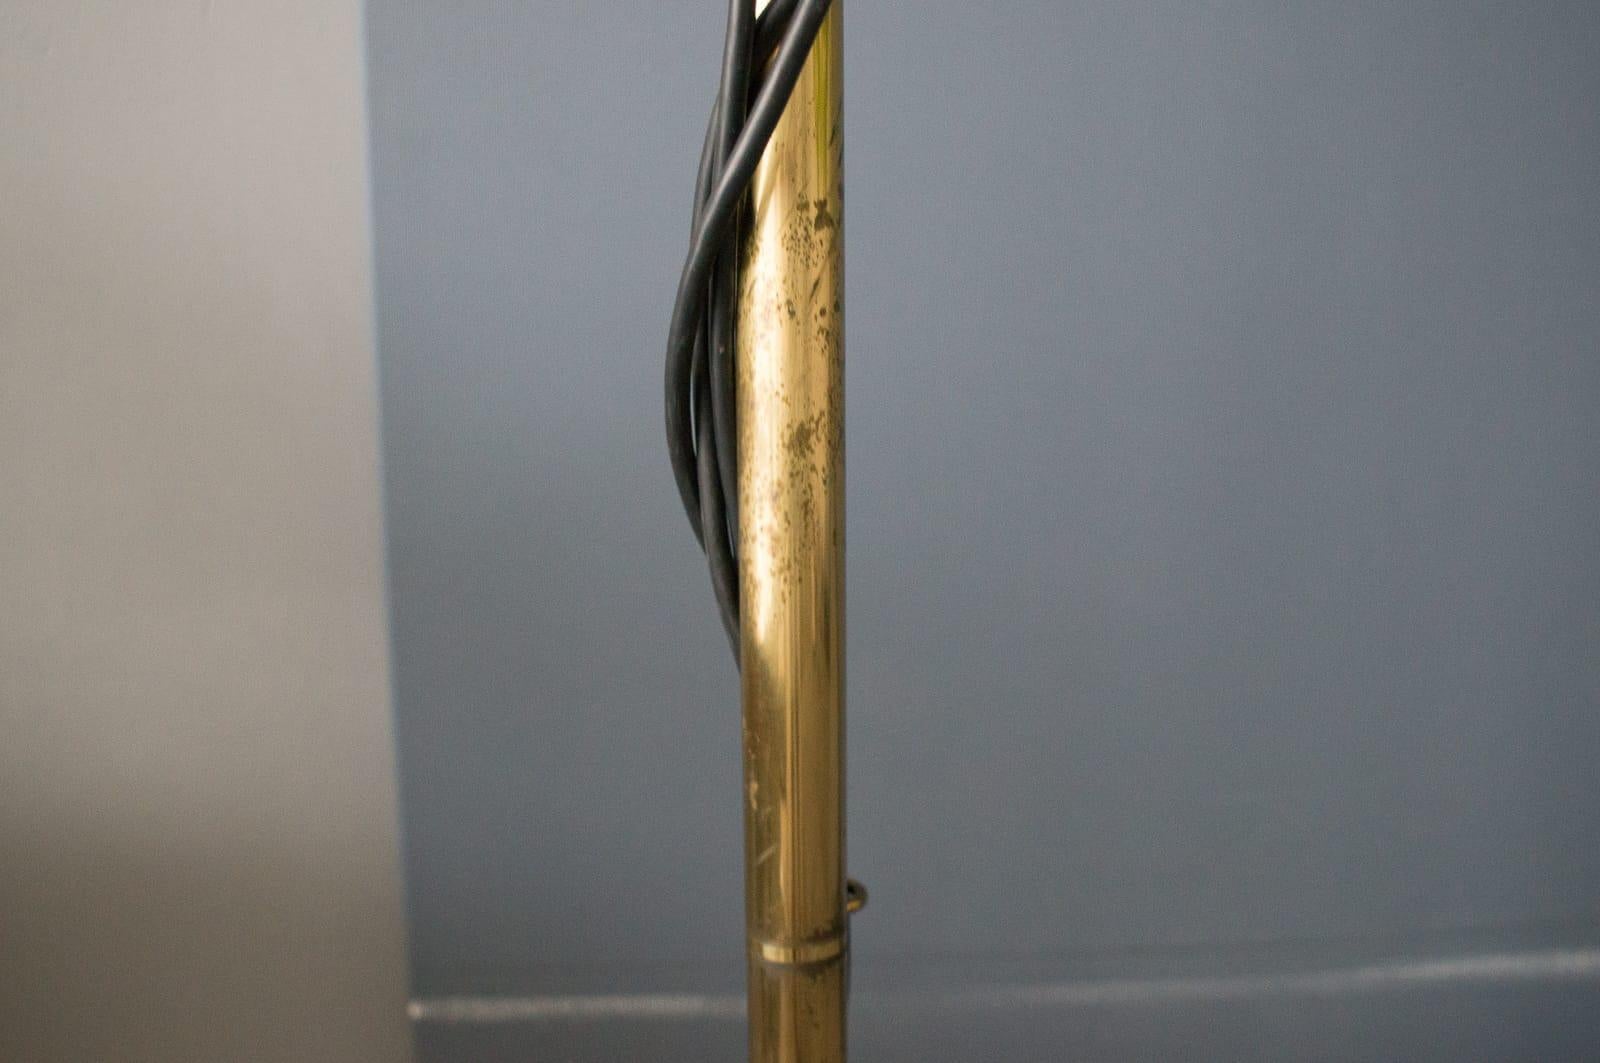 Extremly Rare Brass Tension Lamp from Florian Schulz, Model S 100 9